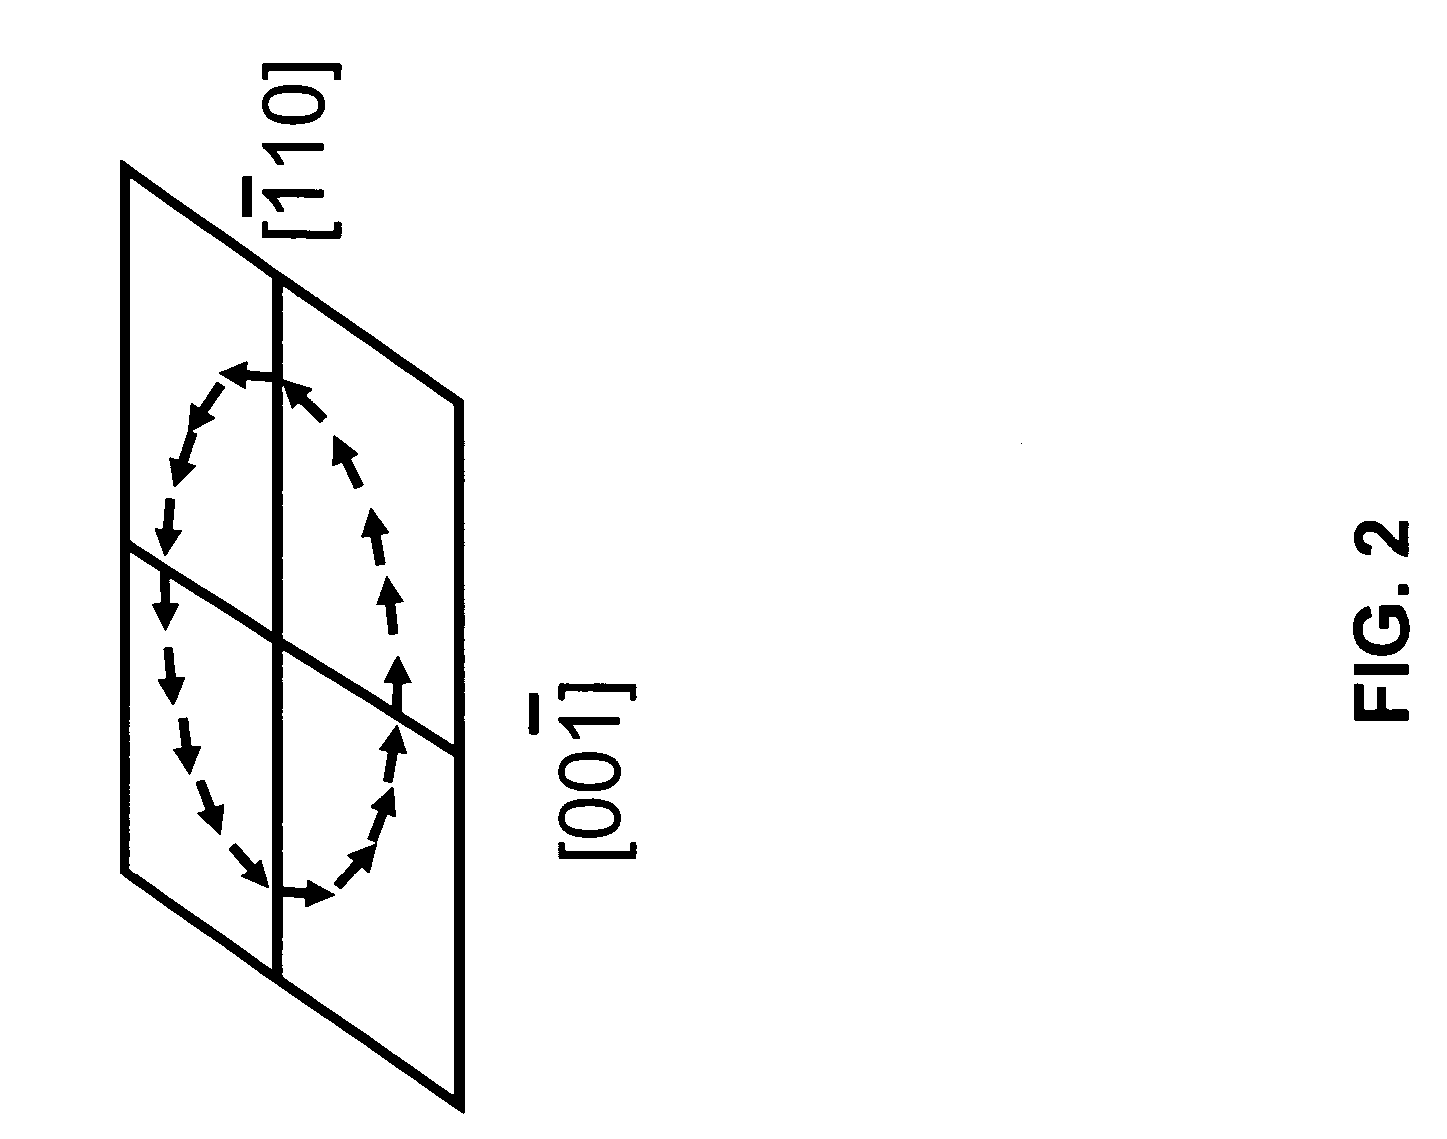 Non-magnetic semiconductor spin transistor